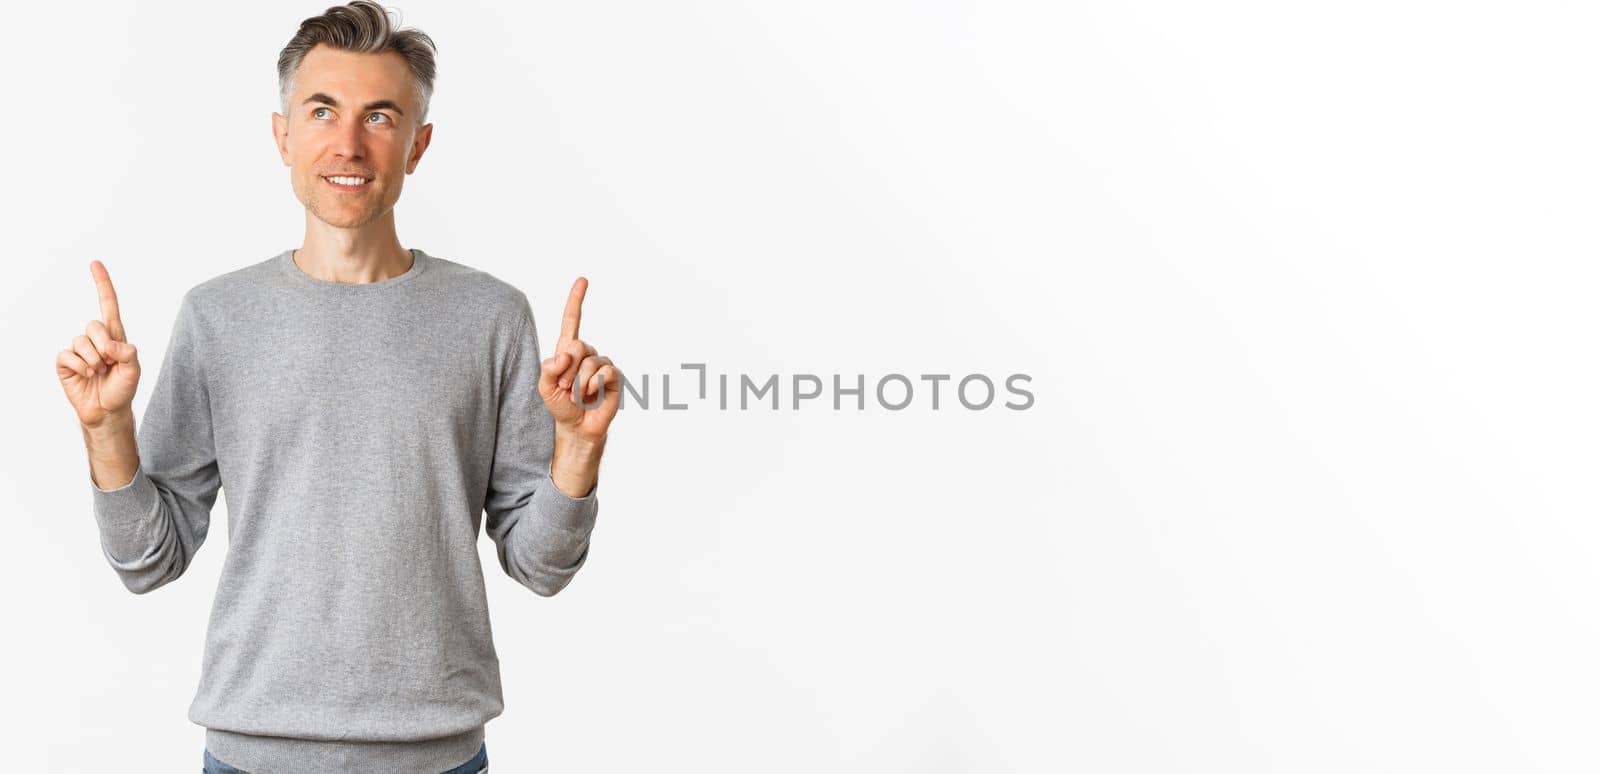 Image of handsome middle-aged man in grey sweater making his choice, smiling thoughtful, pointing fingers up and looking at product, standing over white background.